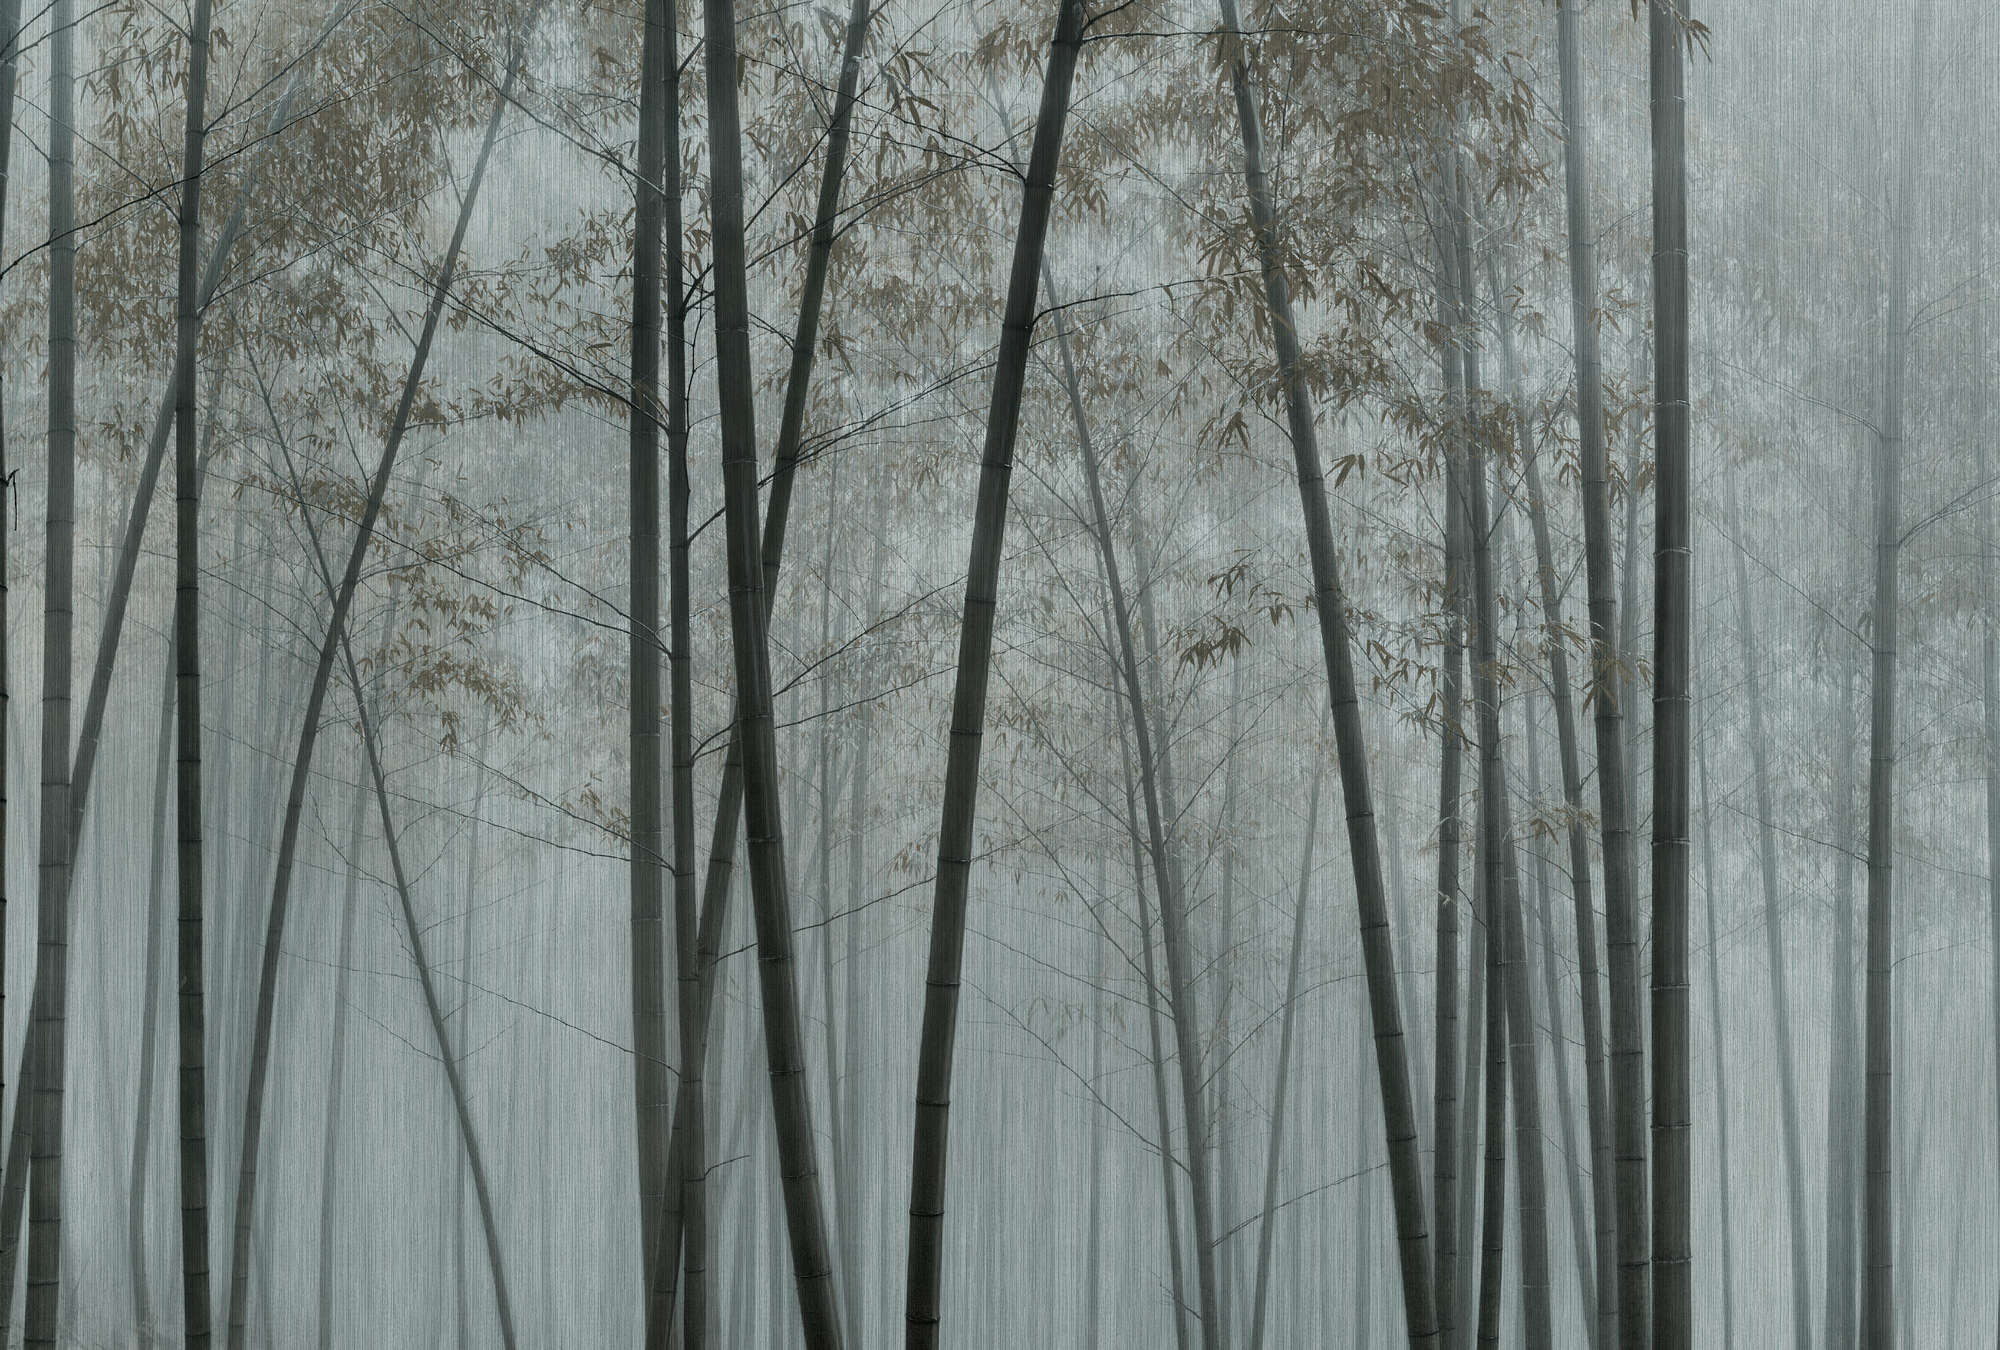             In the Bamboo 1 - bamboo photo wallpaper bamboo forest in the mist
        